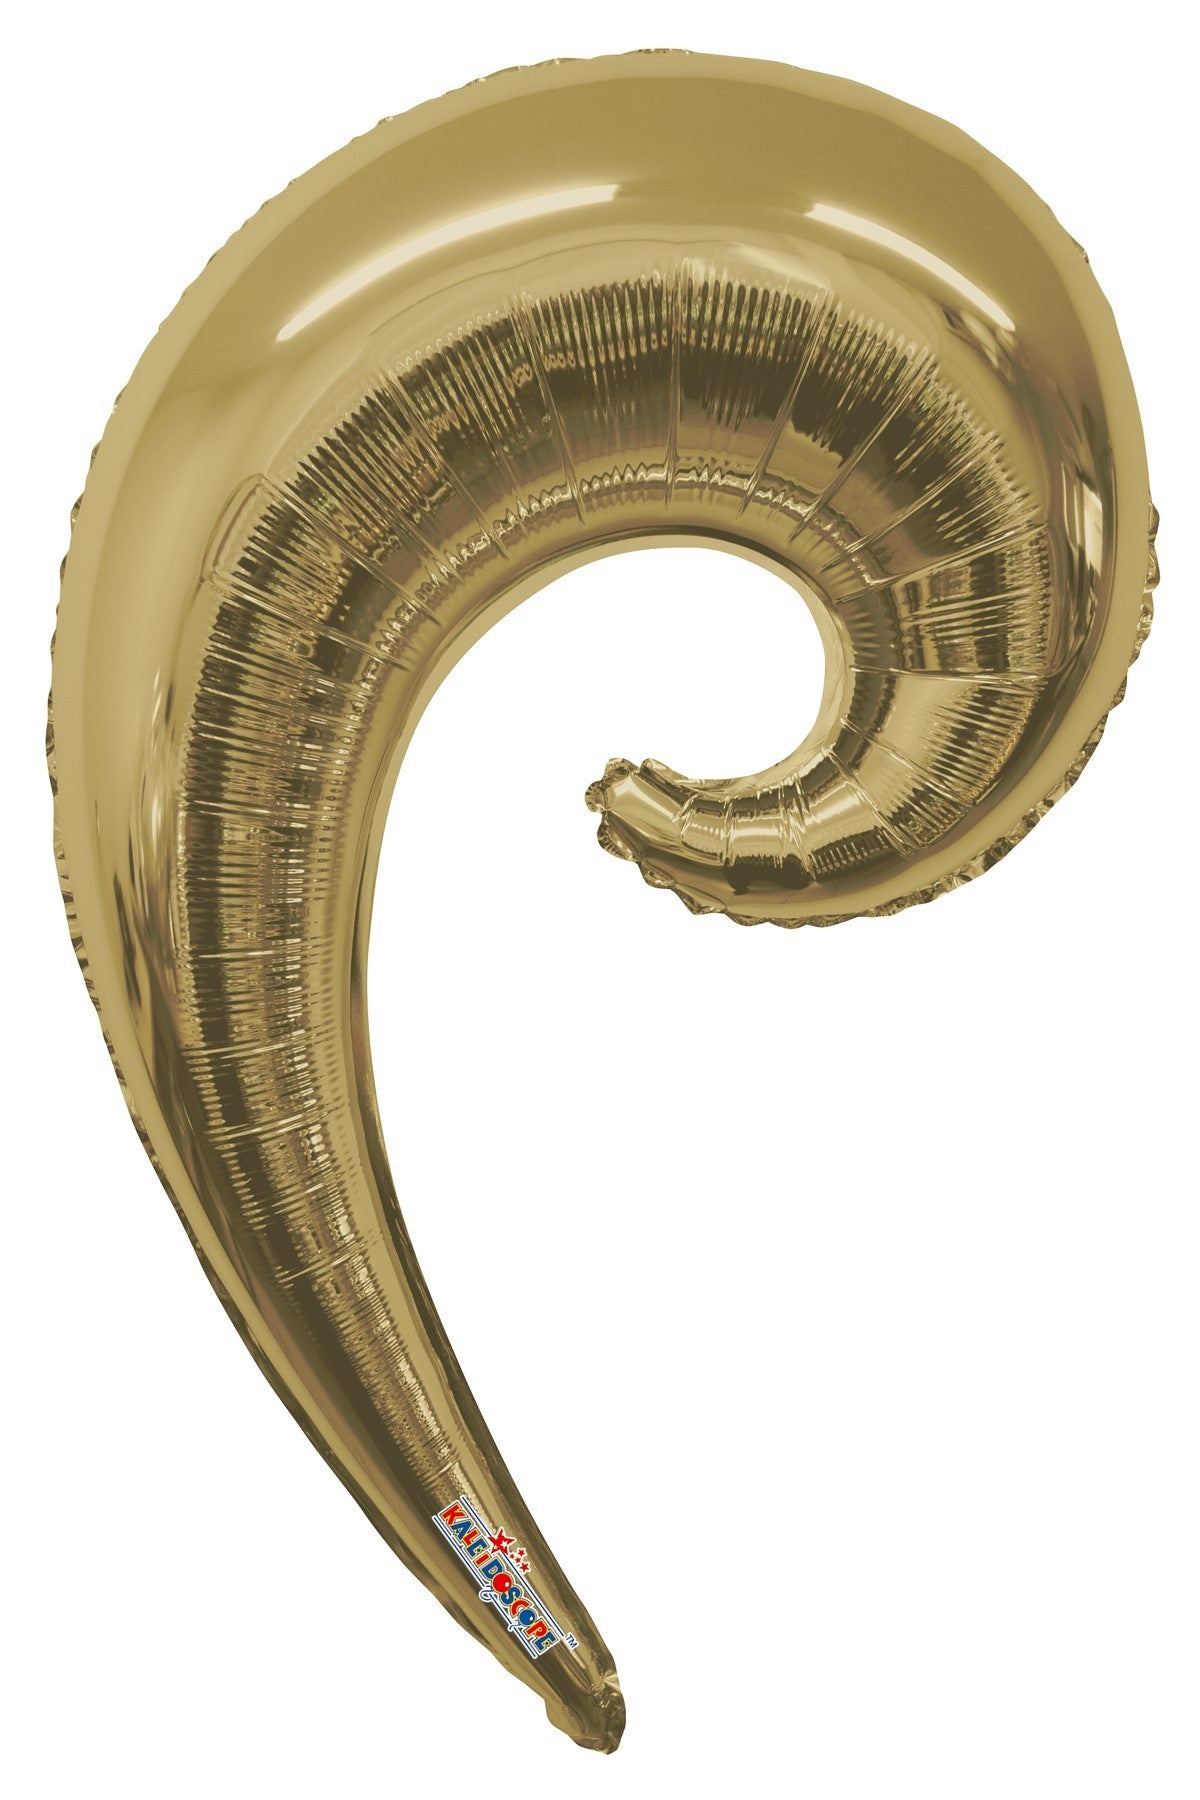 View White Gold Wave Balloon 36 inch information